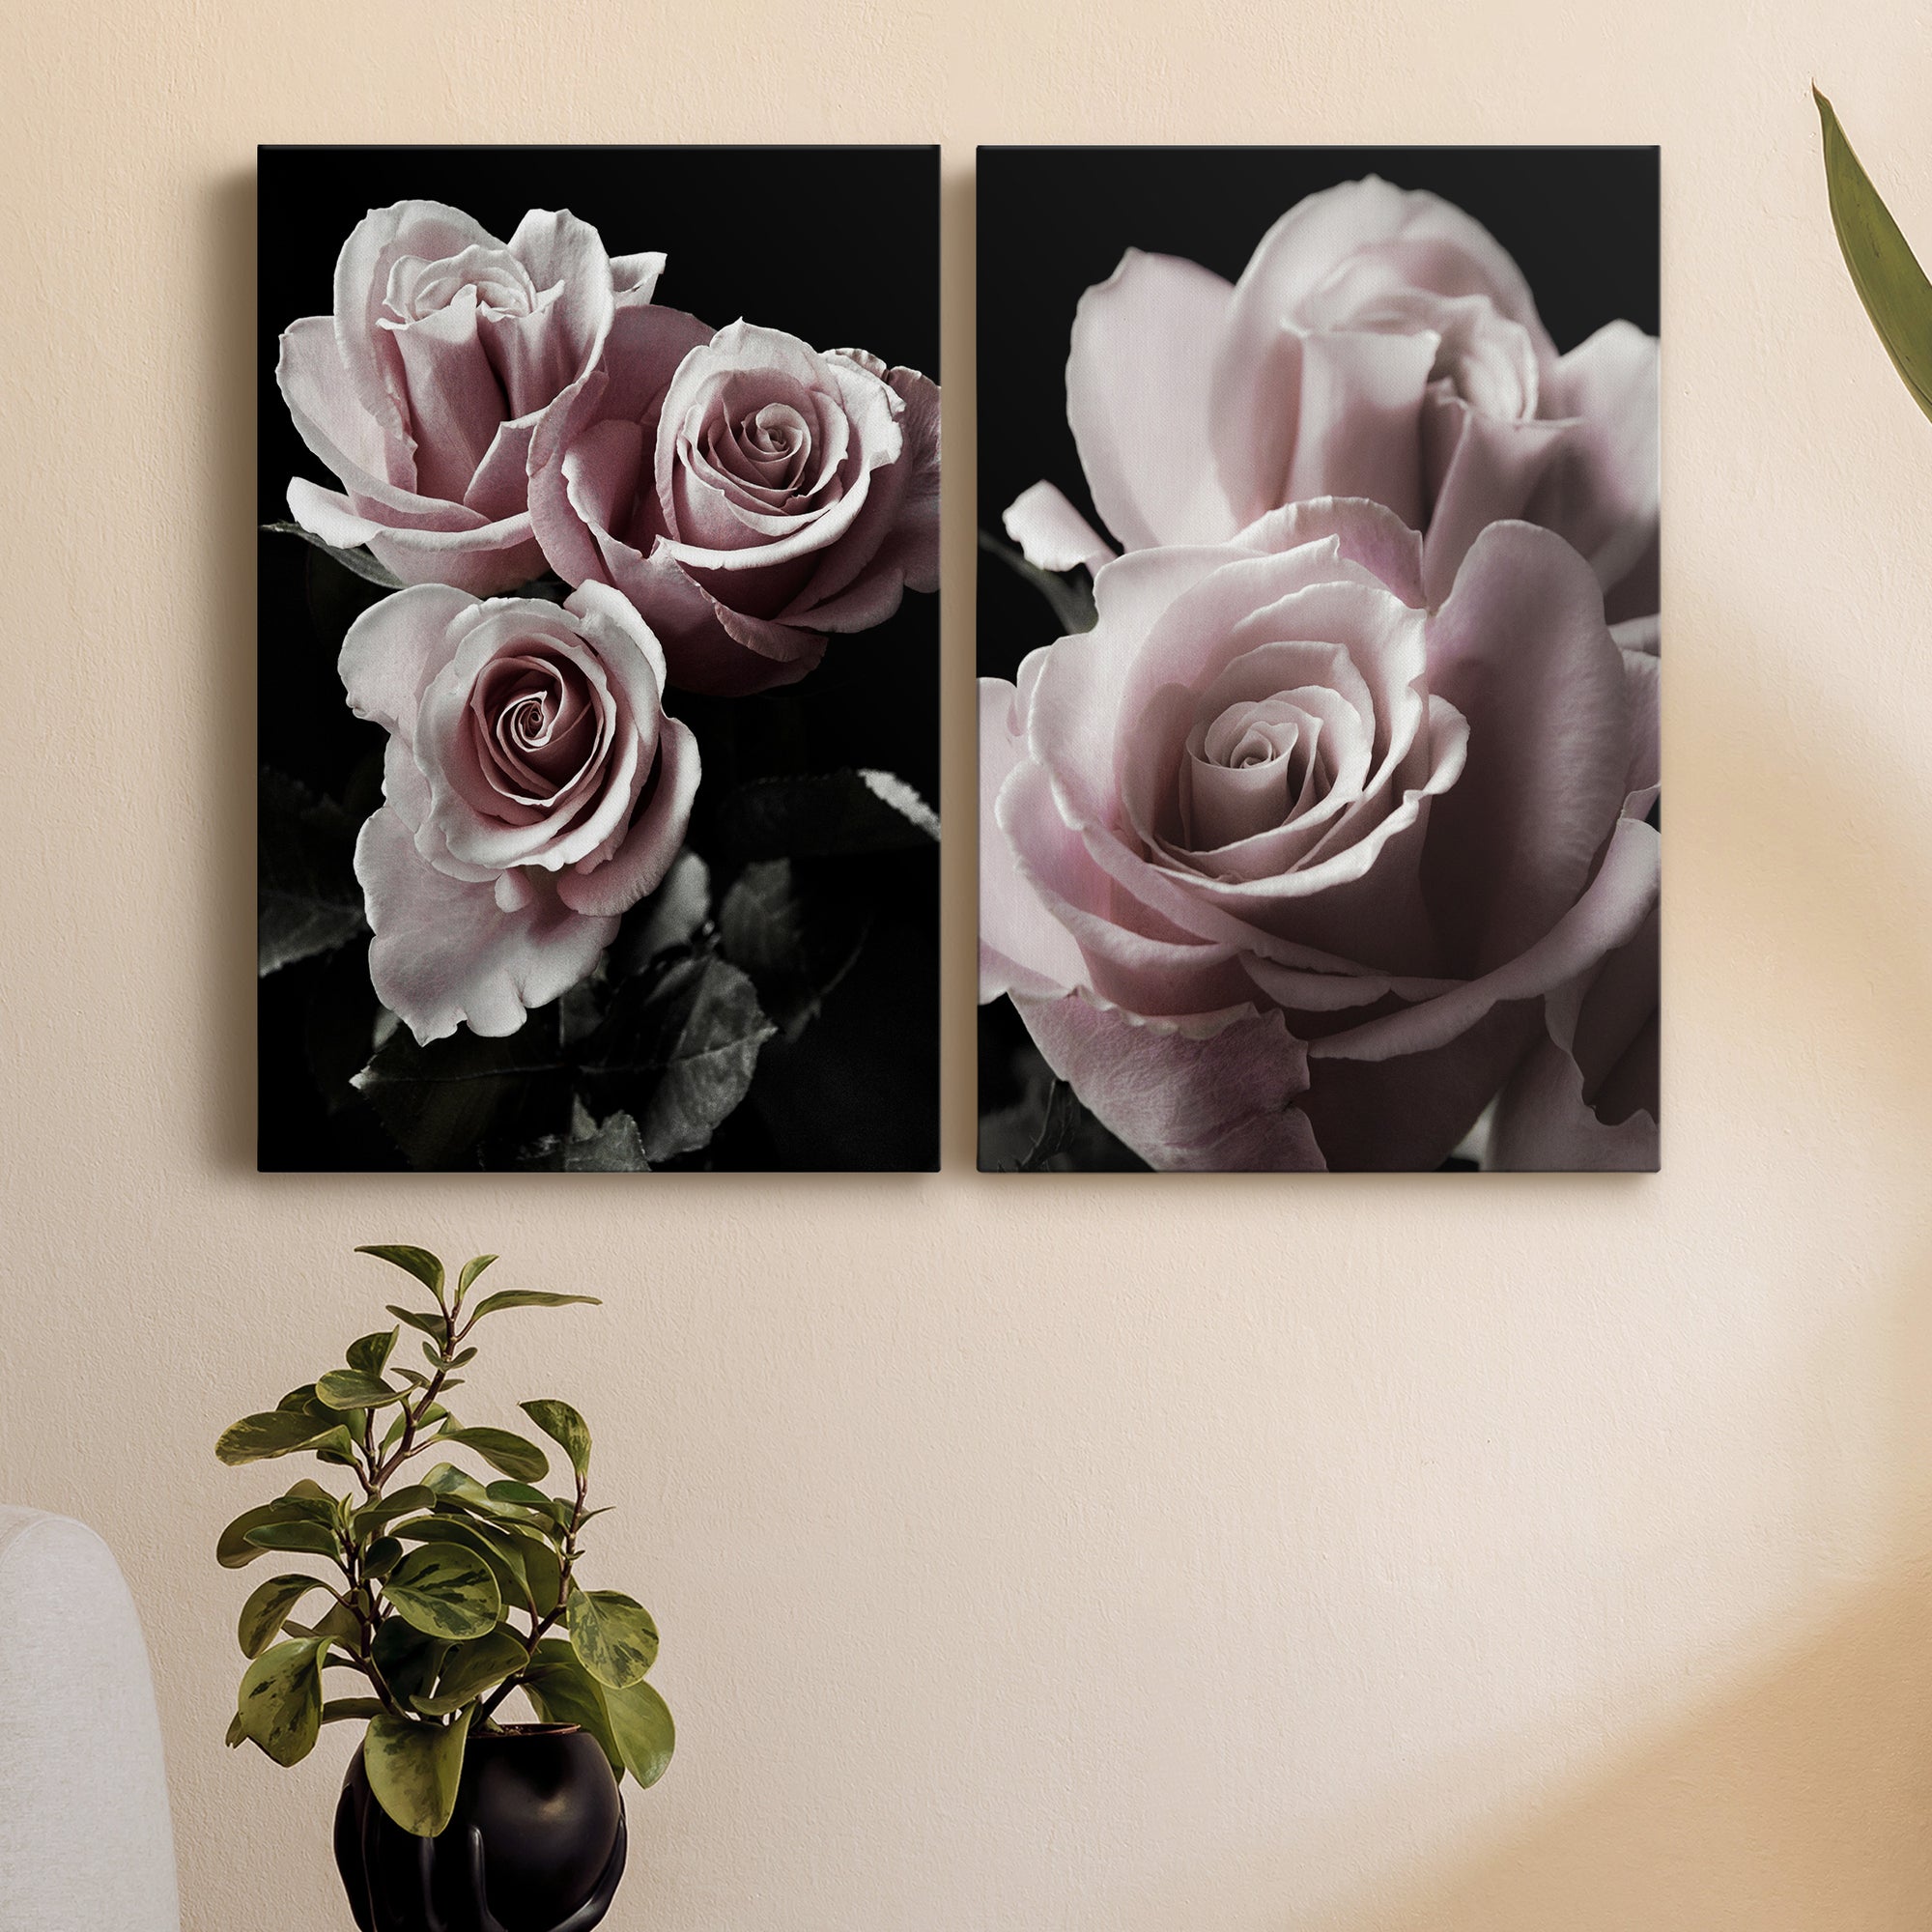 Rose Noir I Premium Gallery Wrapped Canvas - Ready to Hang - Set of 2 - 8 x 12 Each